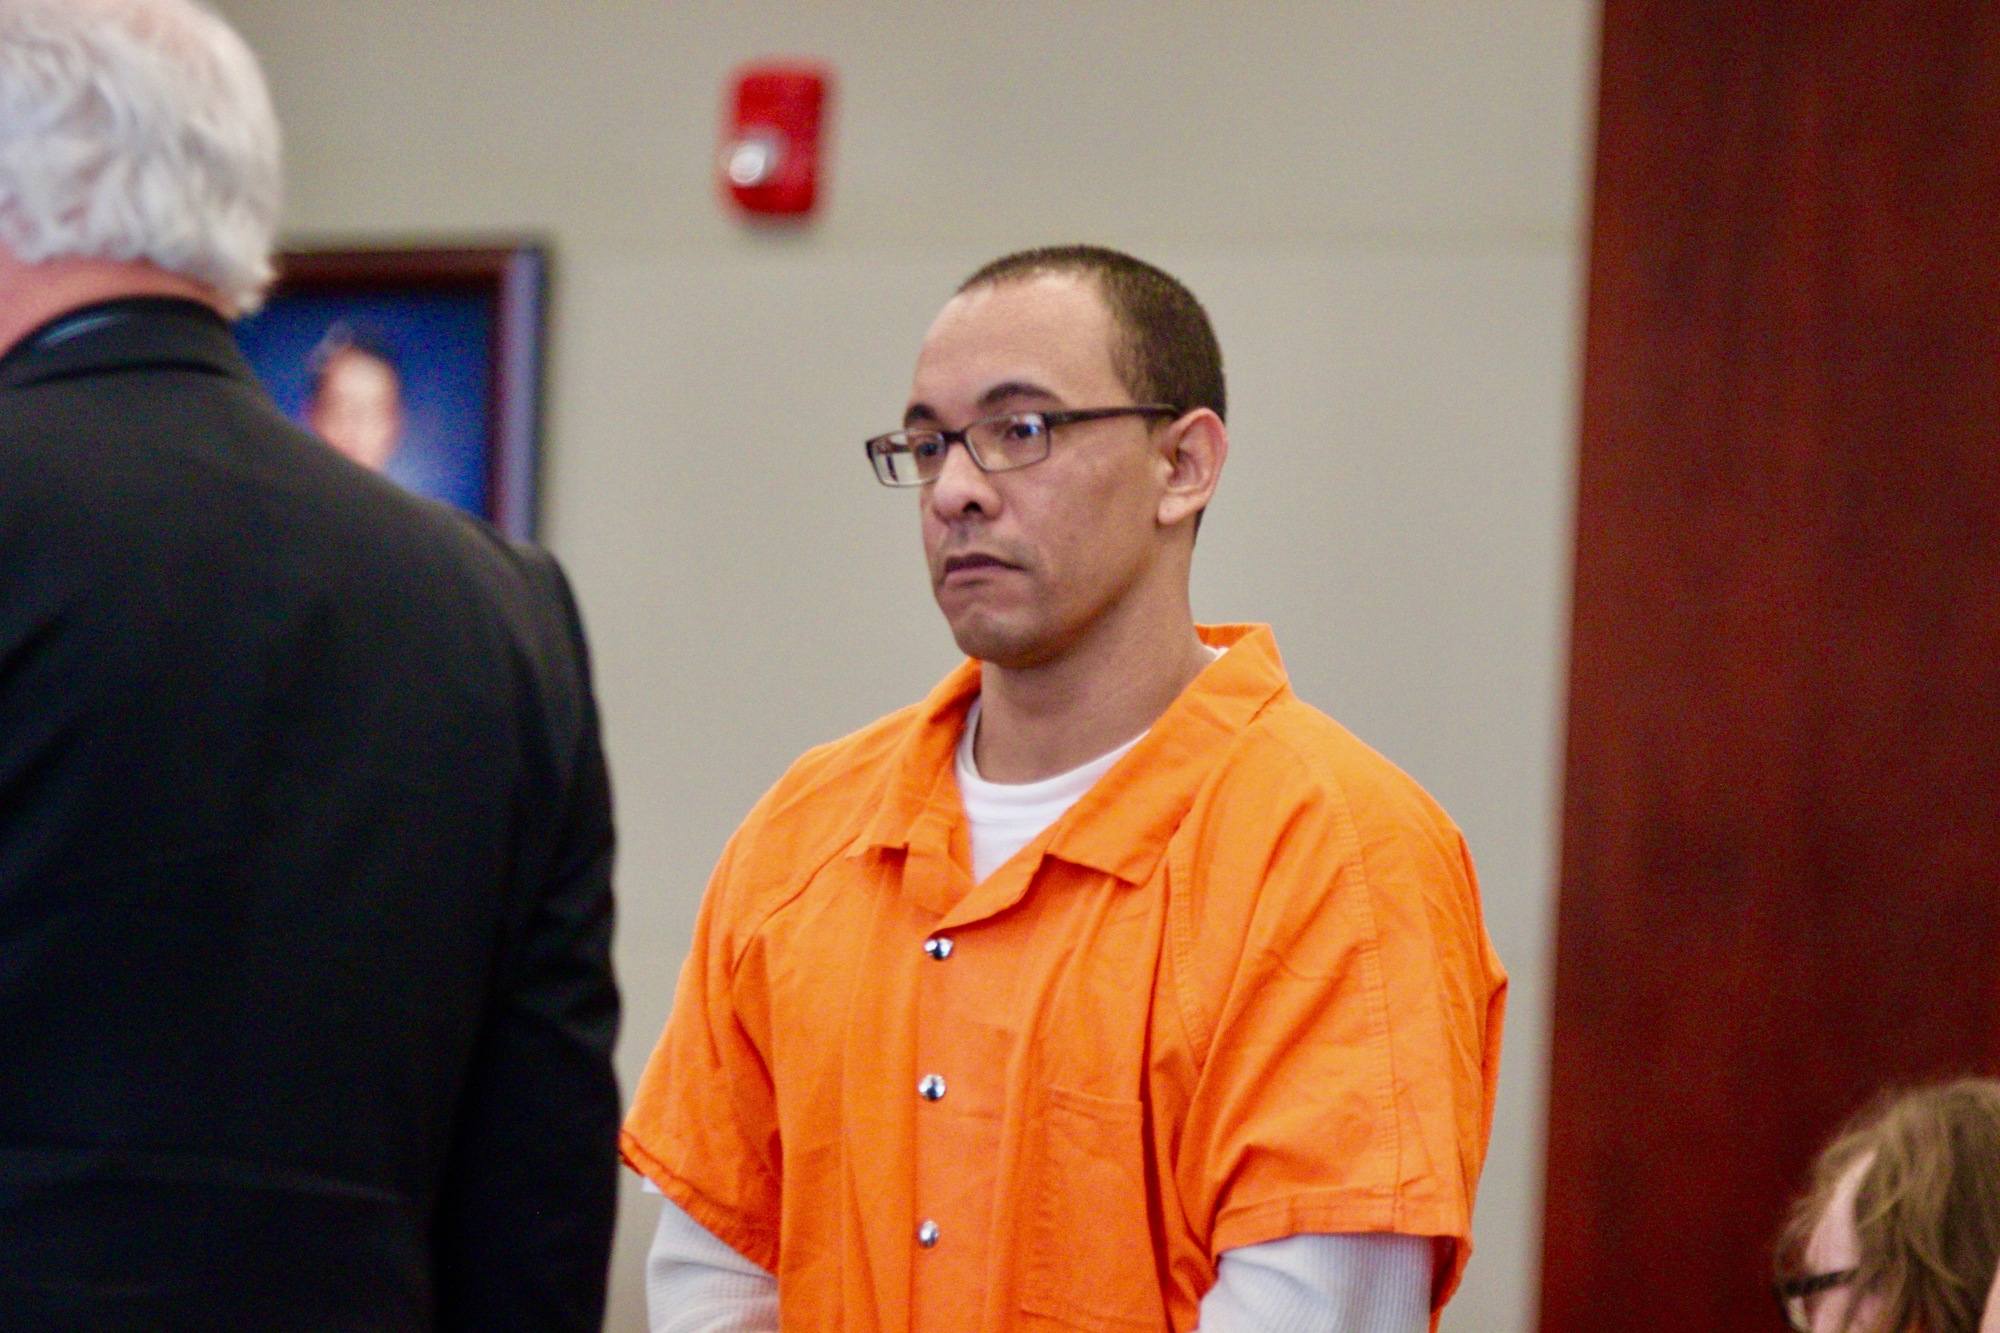 Joseph Colon at his pre-trial hearing on June 12. Photo by Ray Boone